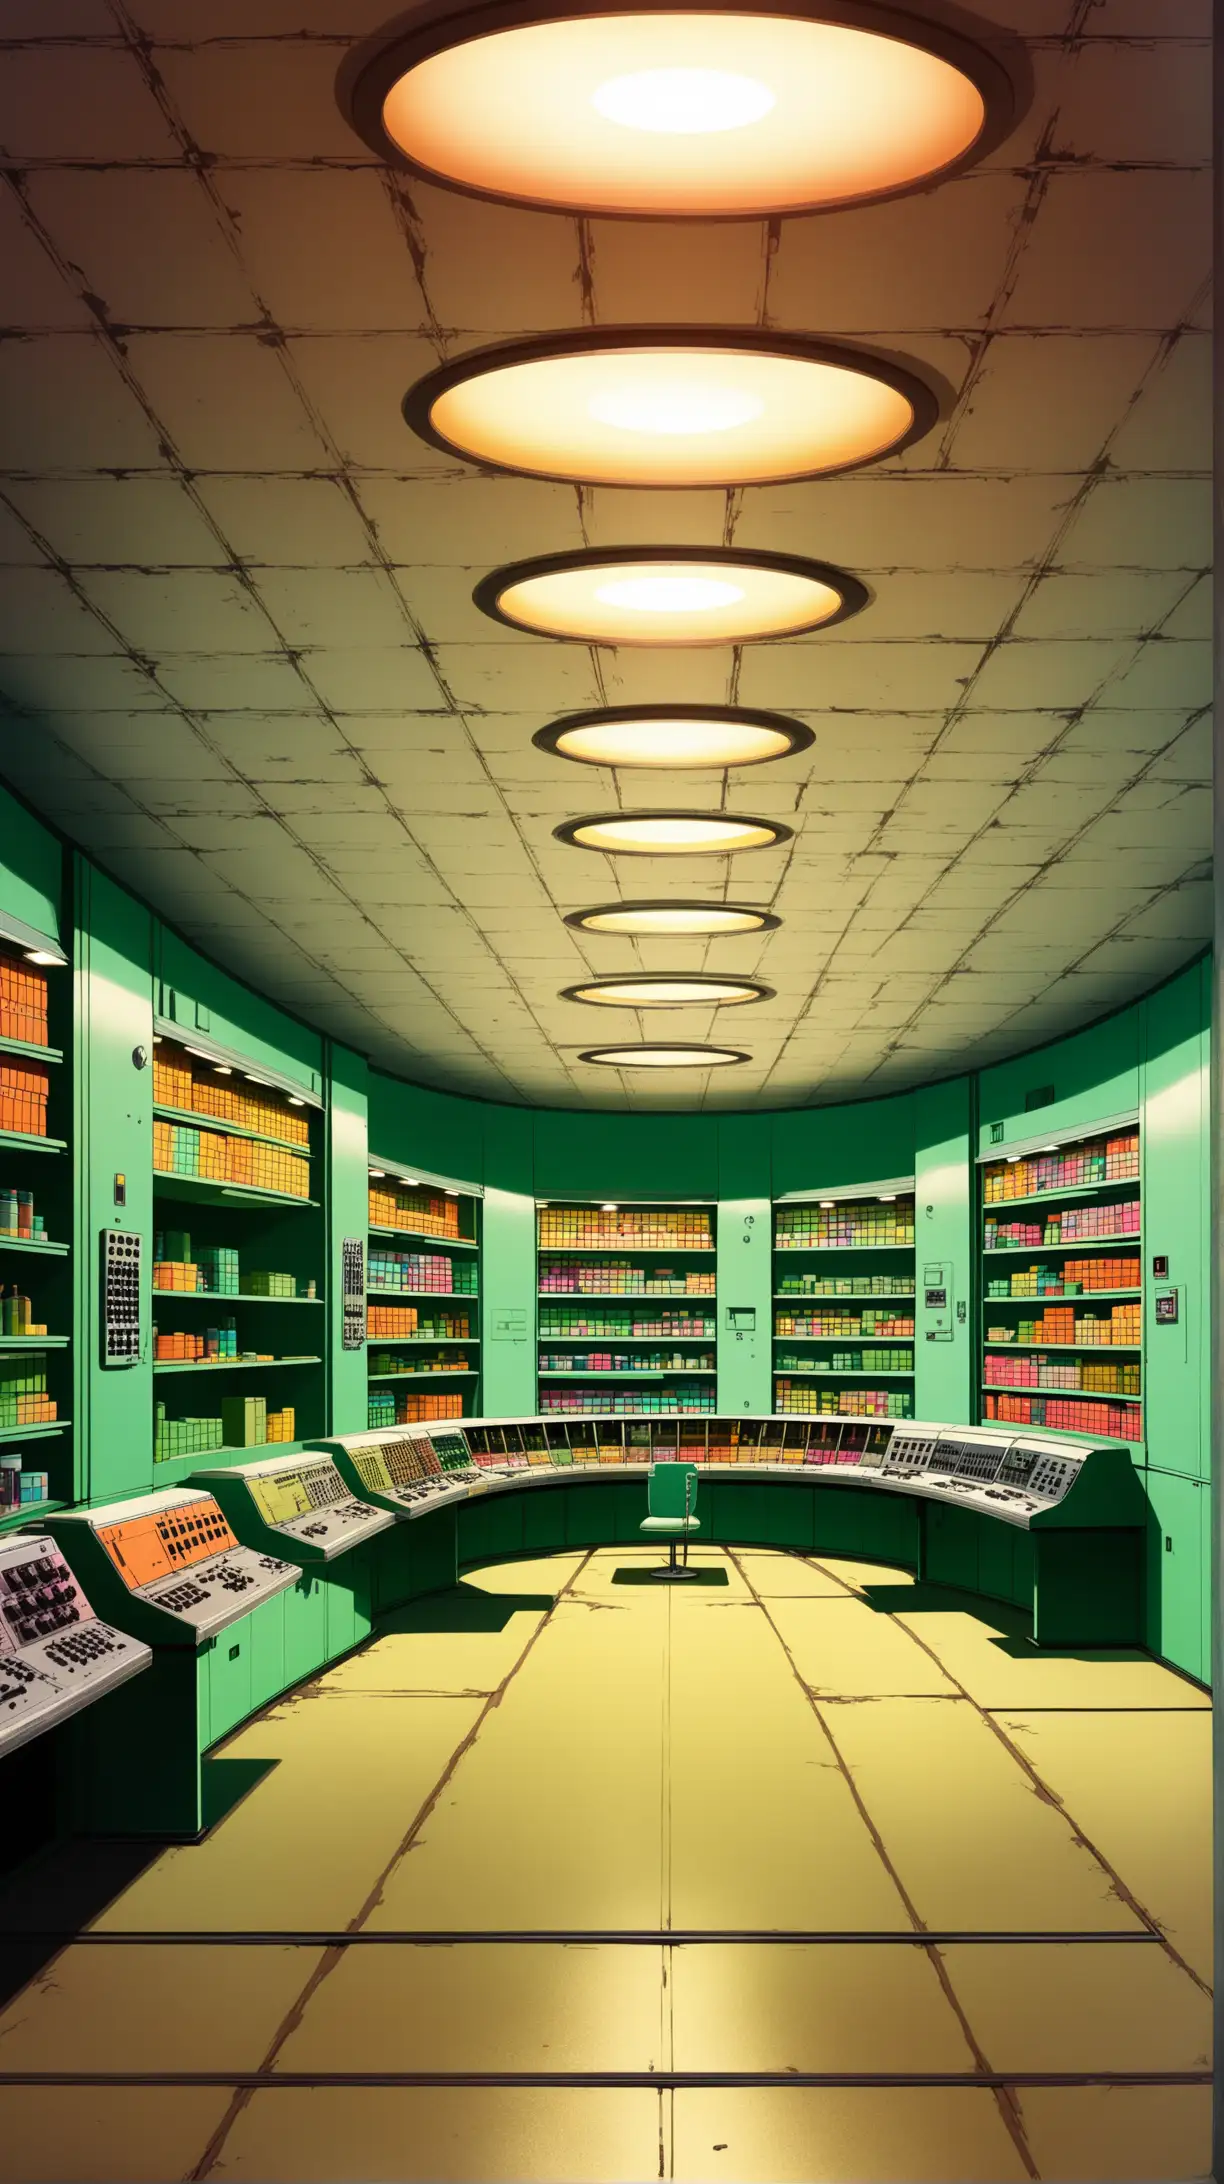 Colorful Sixties Style Nuclear Bunker Supplies for Apocalypse Survival